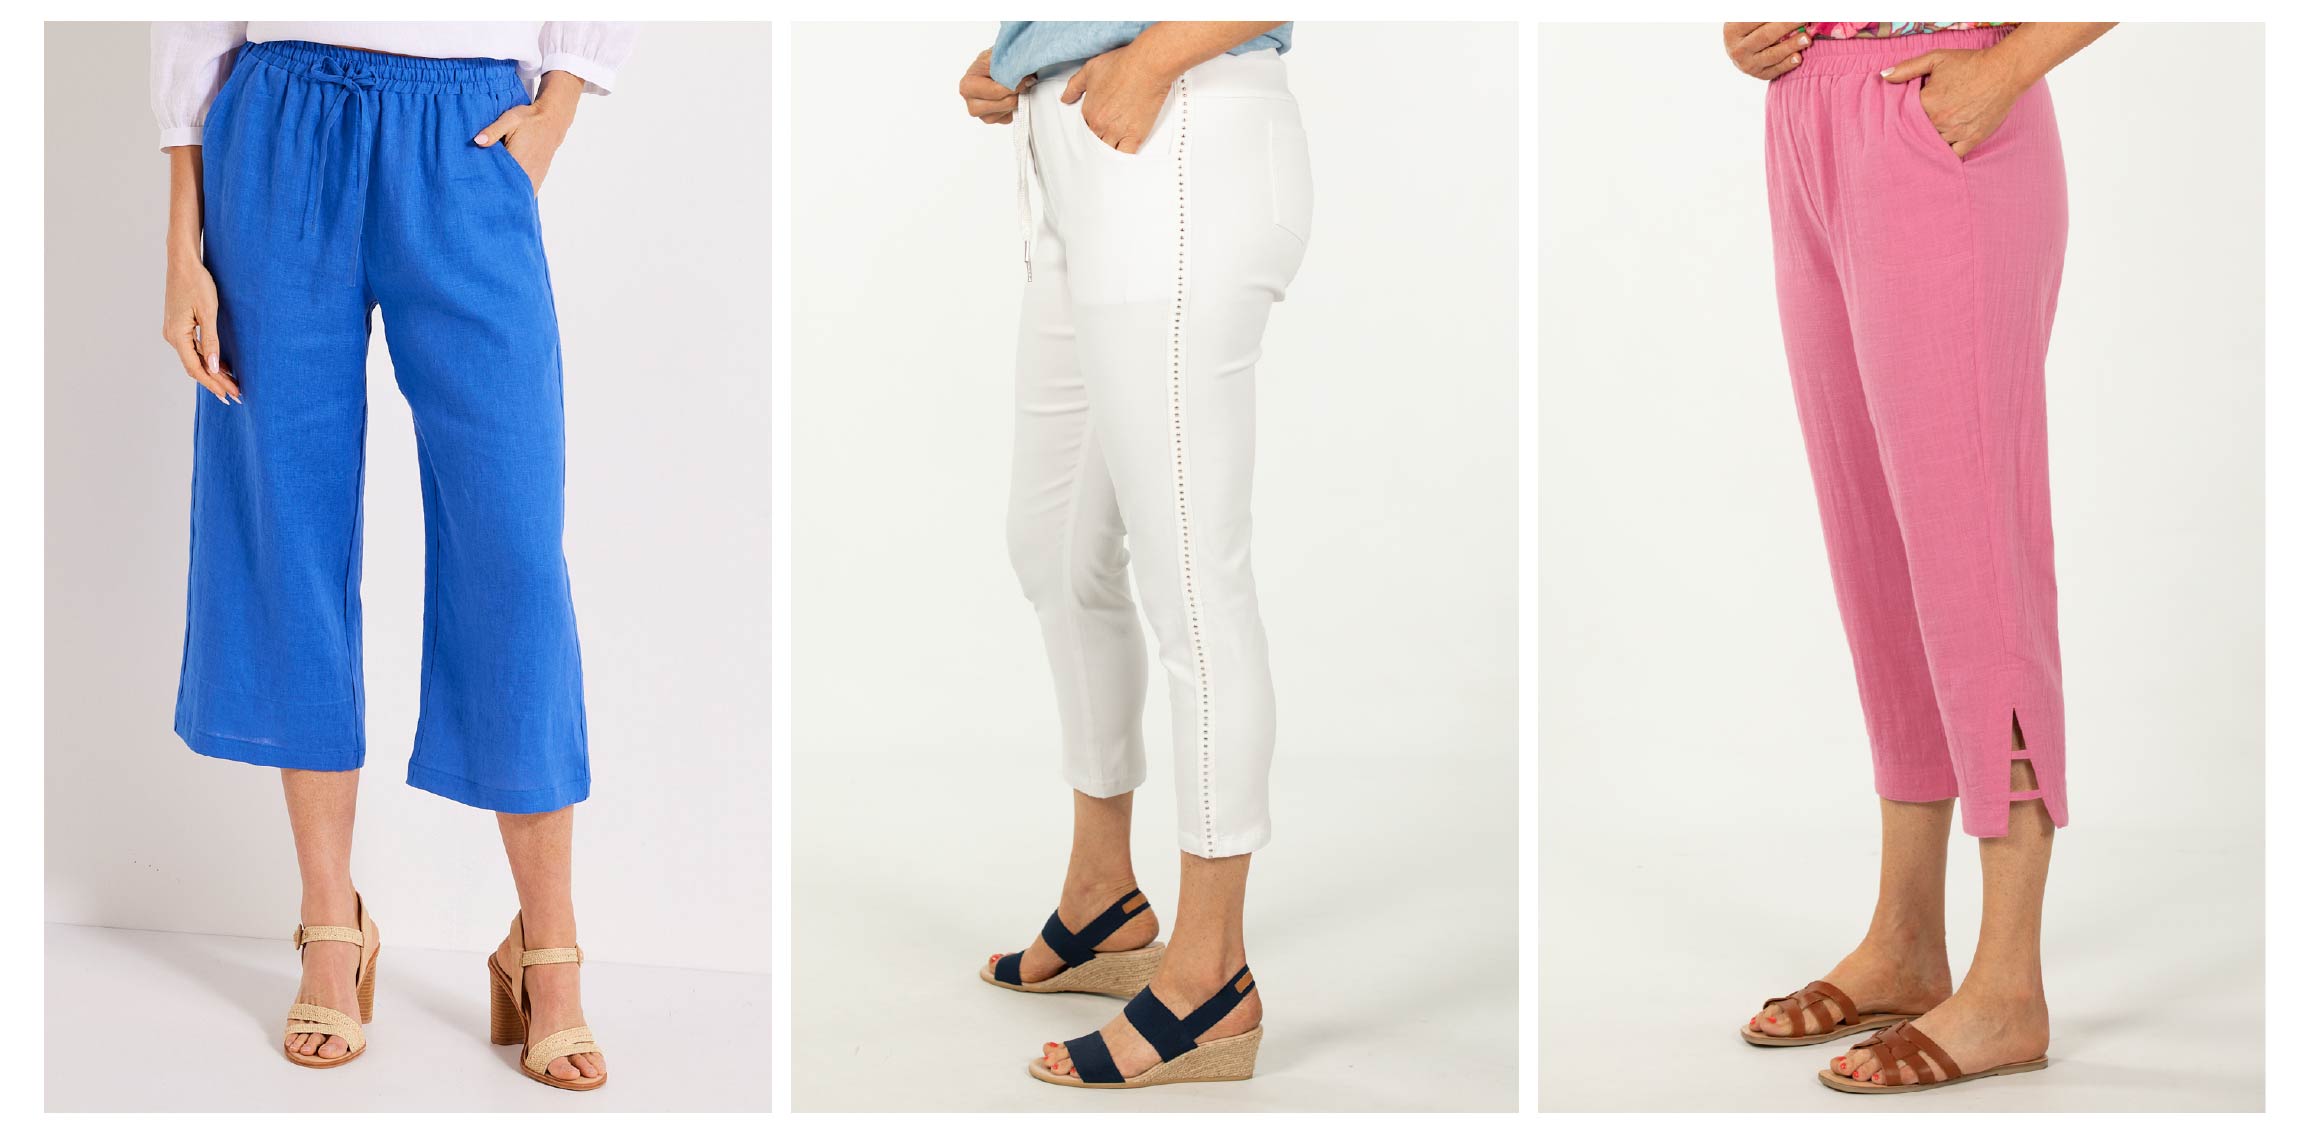 What type of pant is best for ladies? – Fella Hamilton